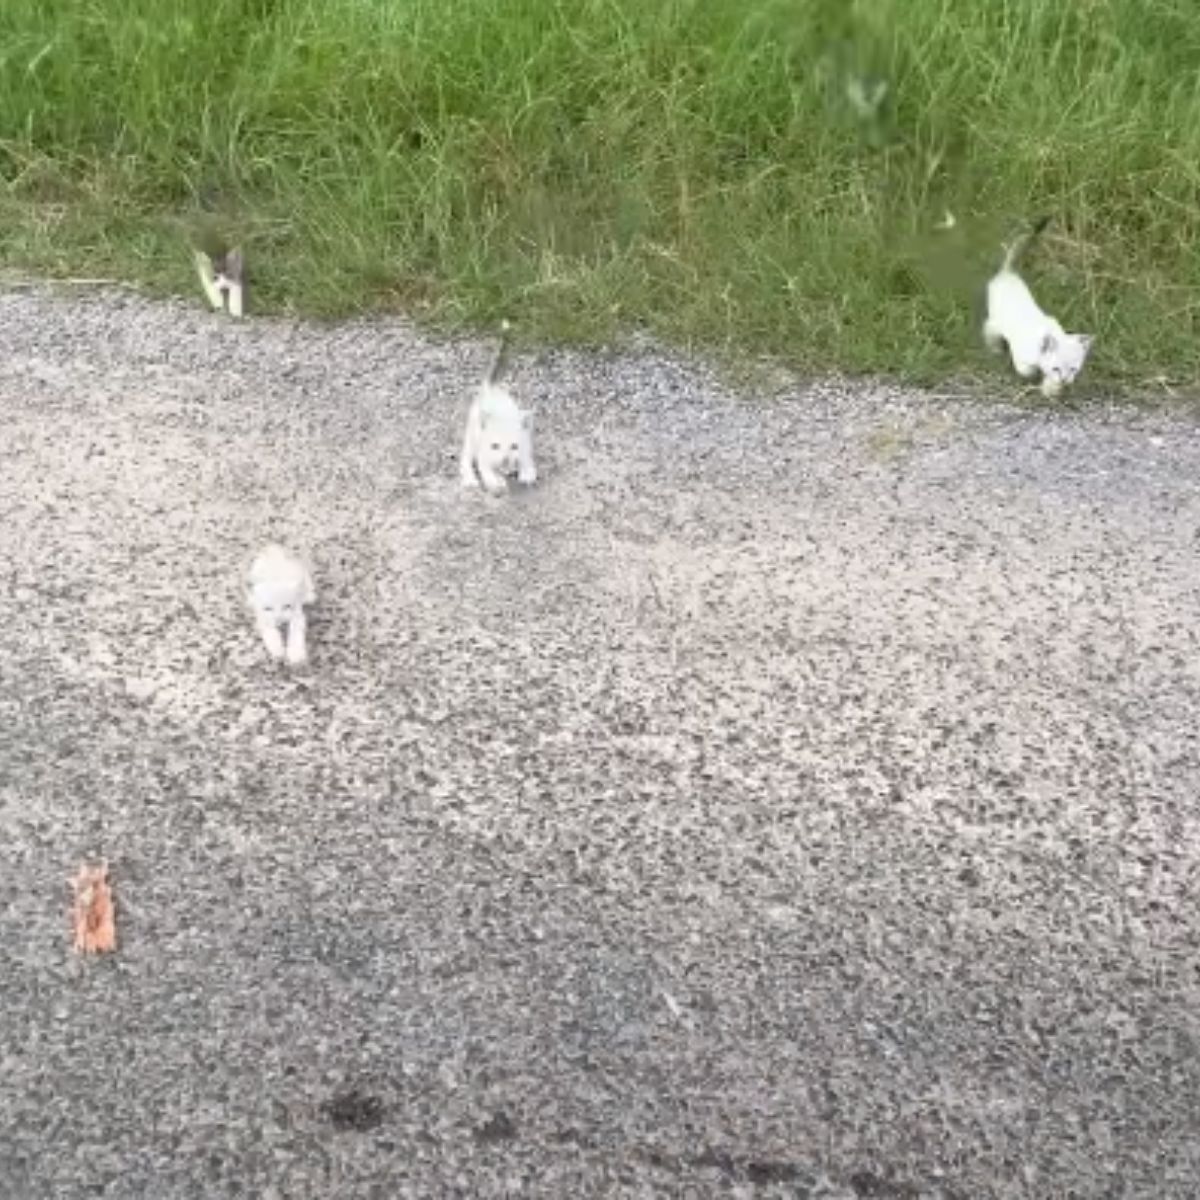 kittens on the road